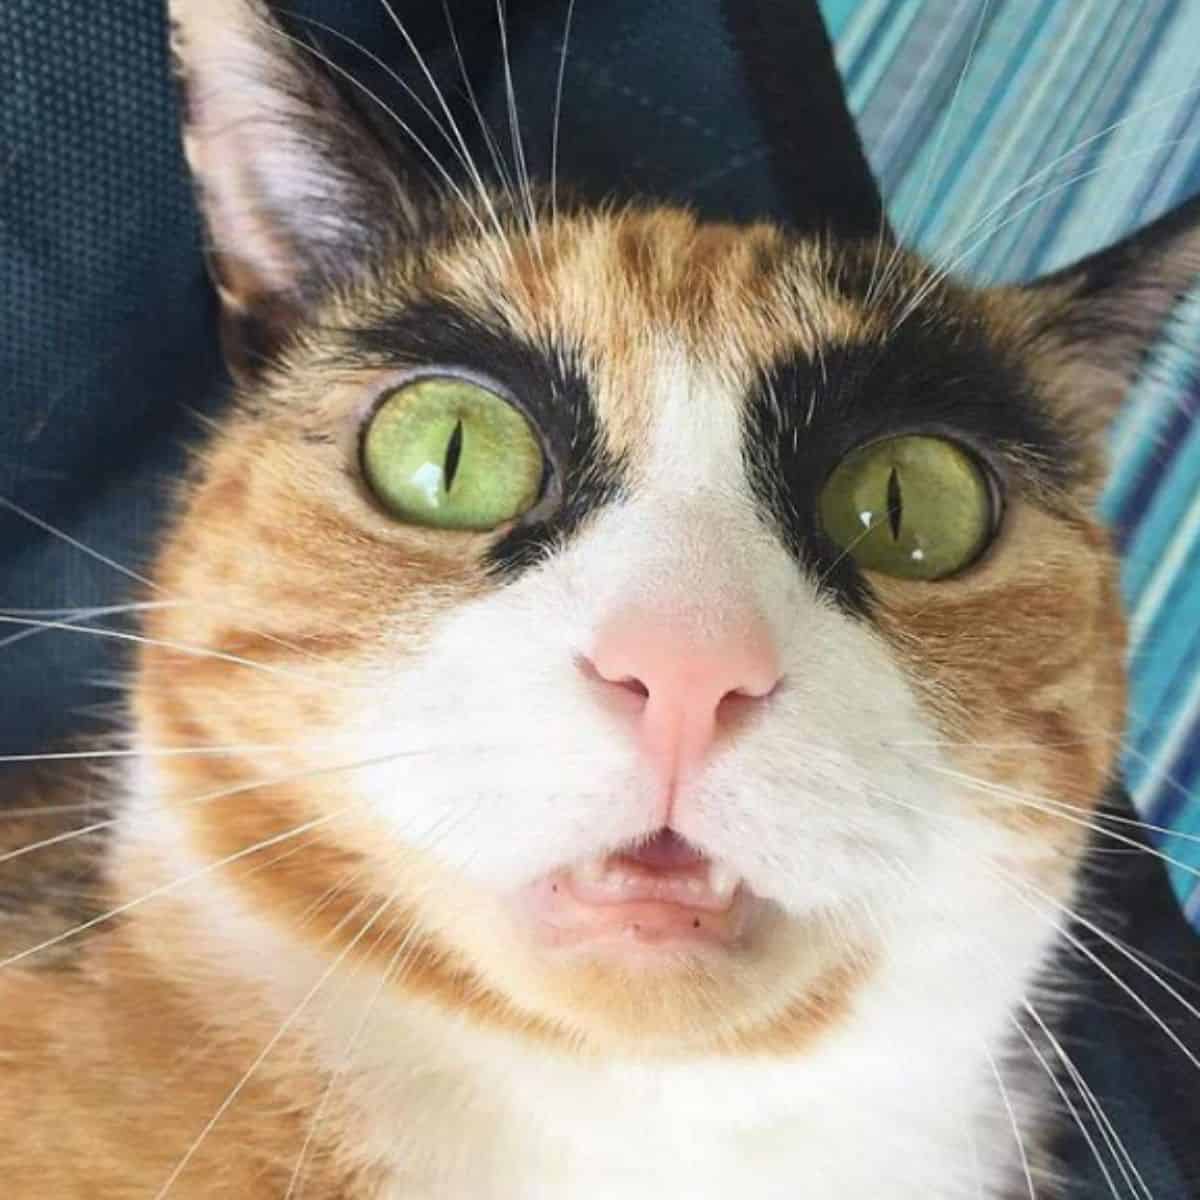 a surprised cat with the most unusual eyebrows looks at the camera